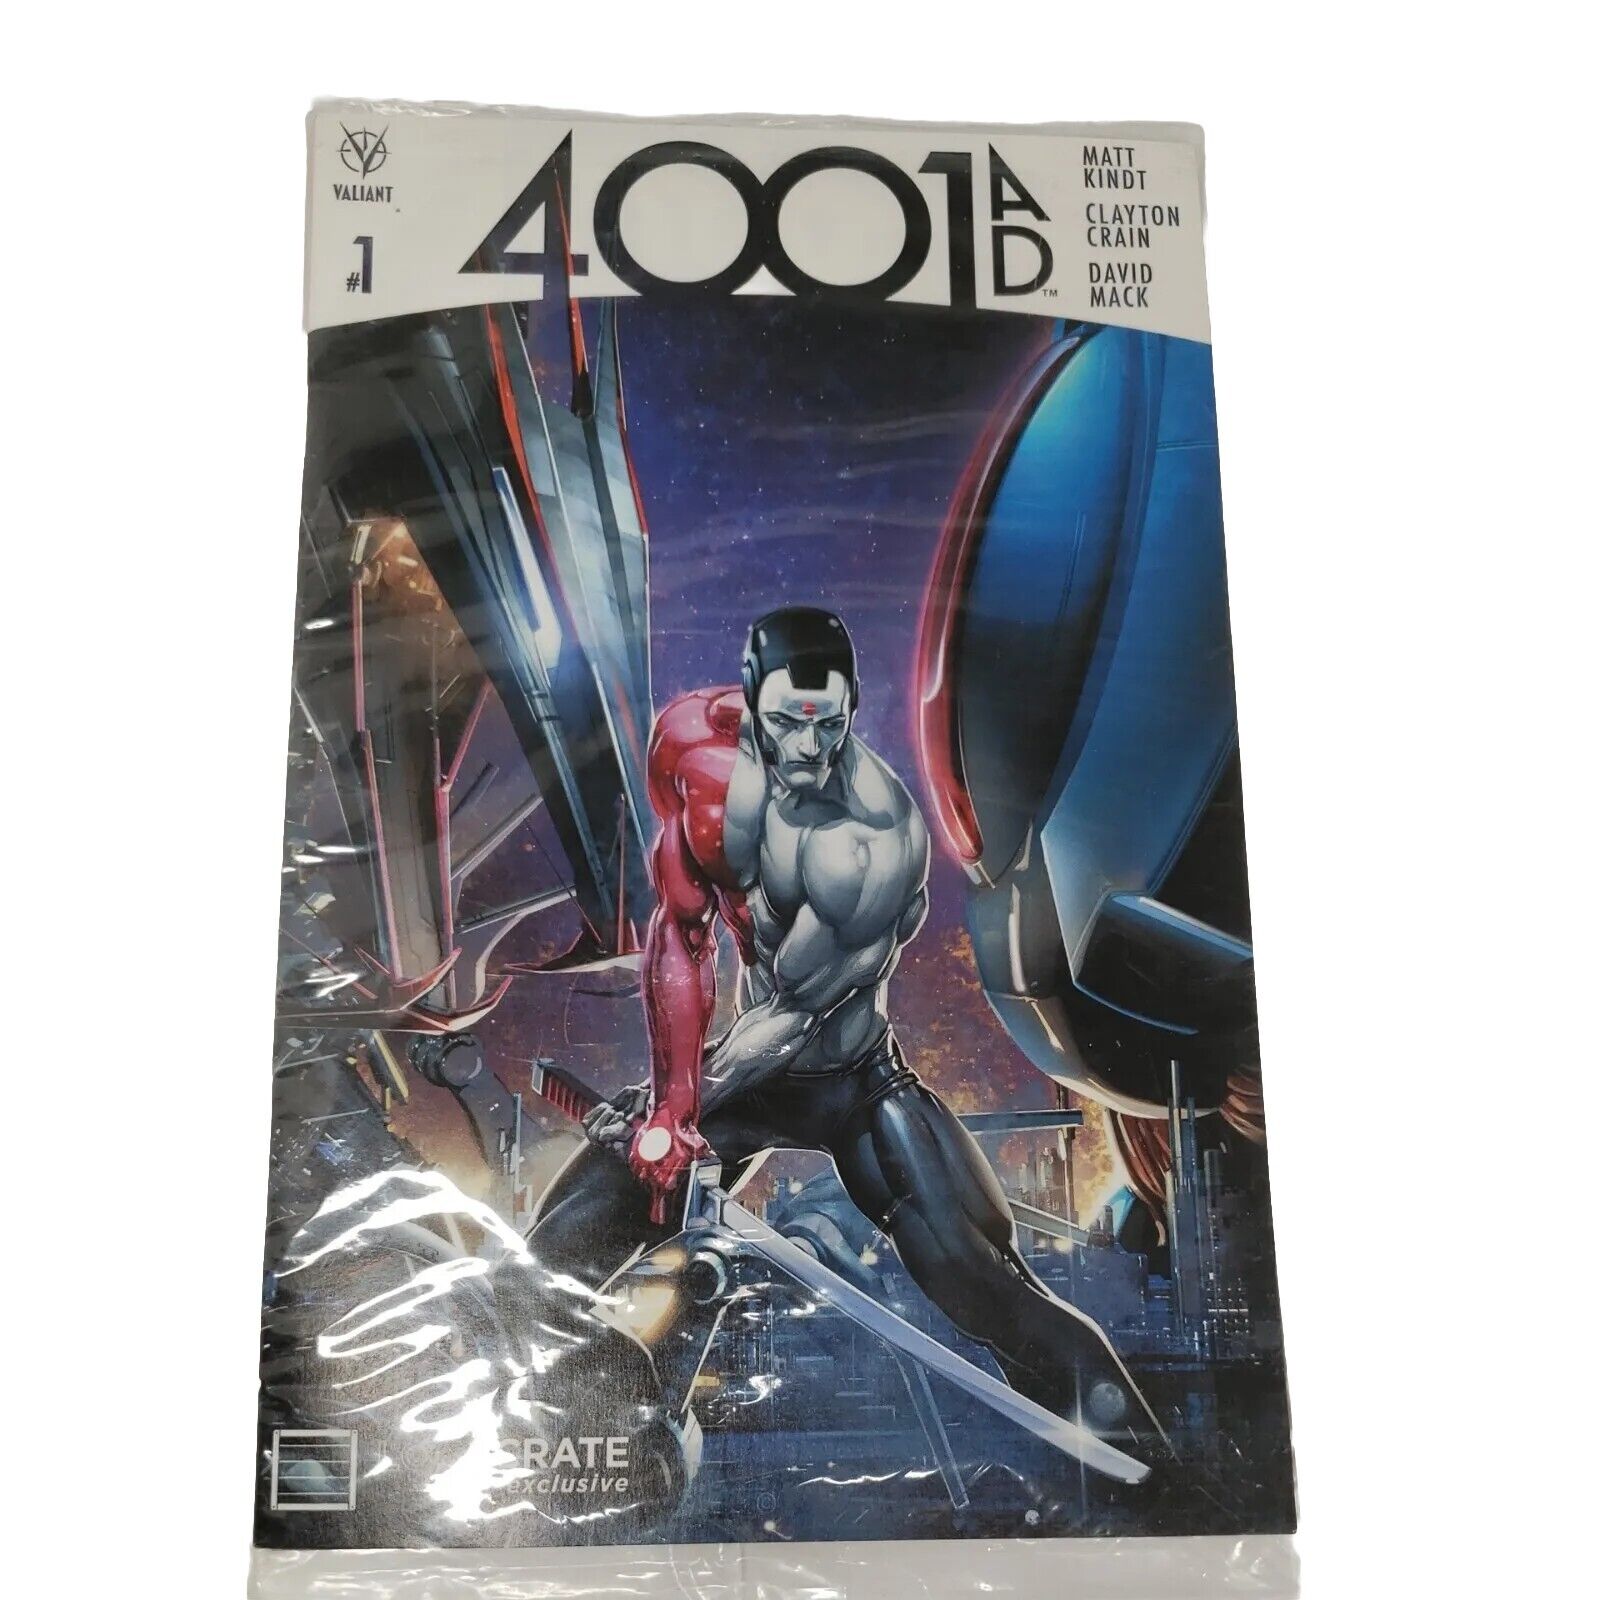 Valiant 4001 AD #1 Comic Book Loot Crate Exclusive Mint In Package Lootcrate